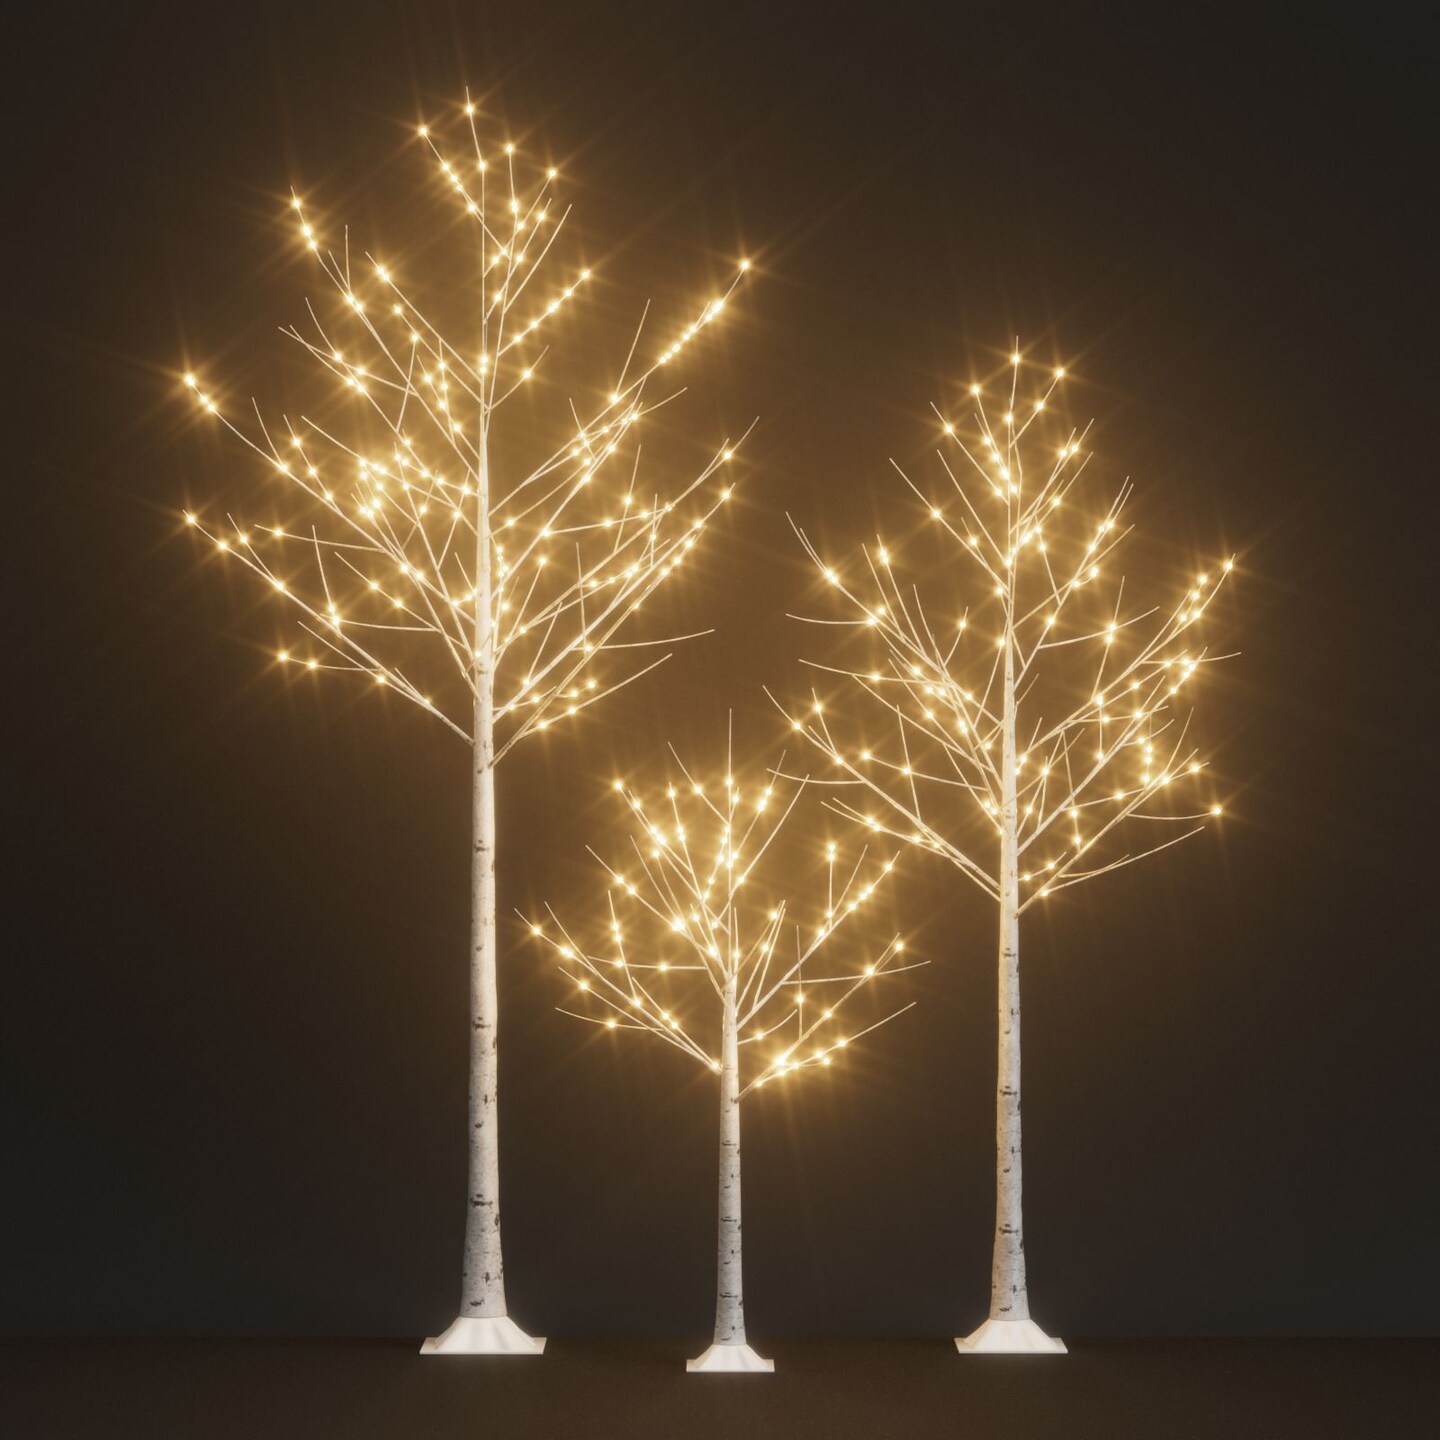 Set of 3 Lighted Birch Tree Artificial Twig Tree Lamp for Christmas (4 ft, 6 ft, 8 ft)